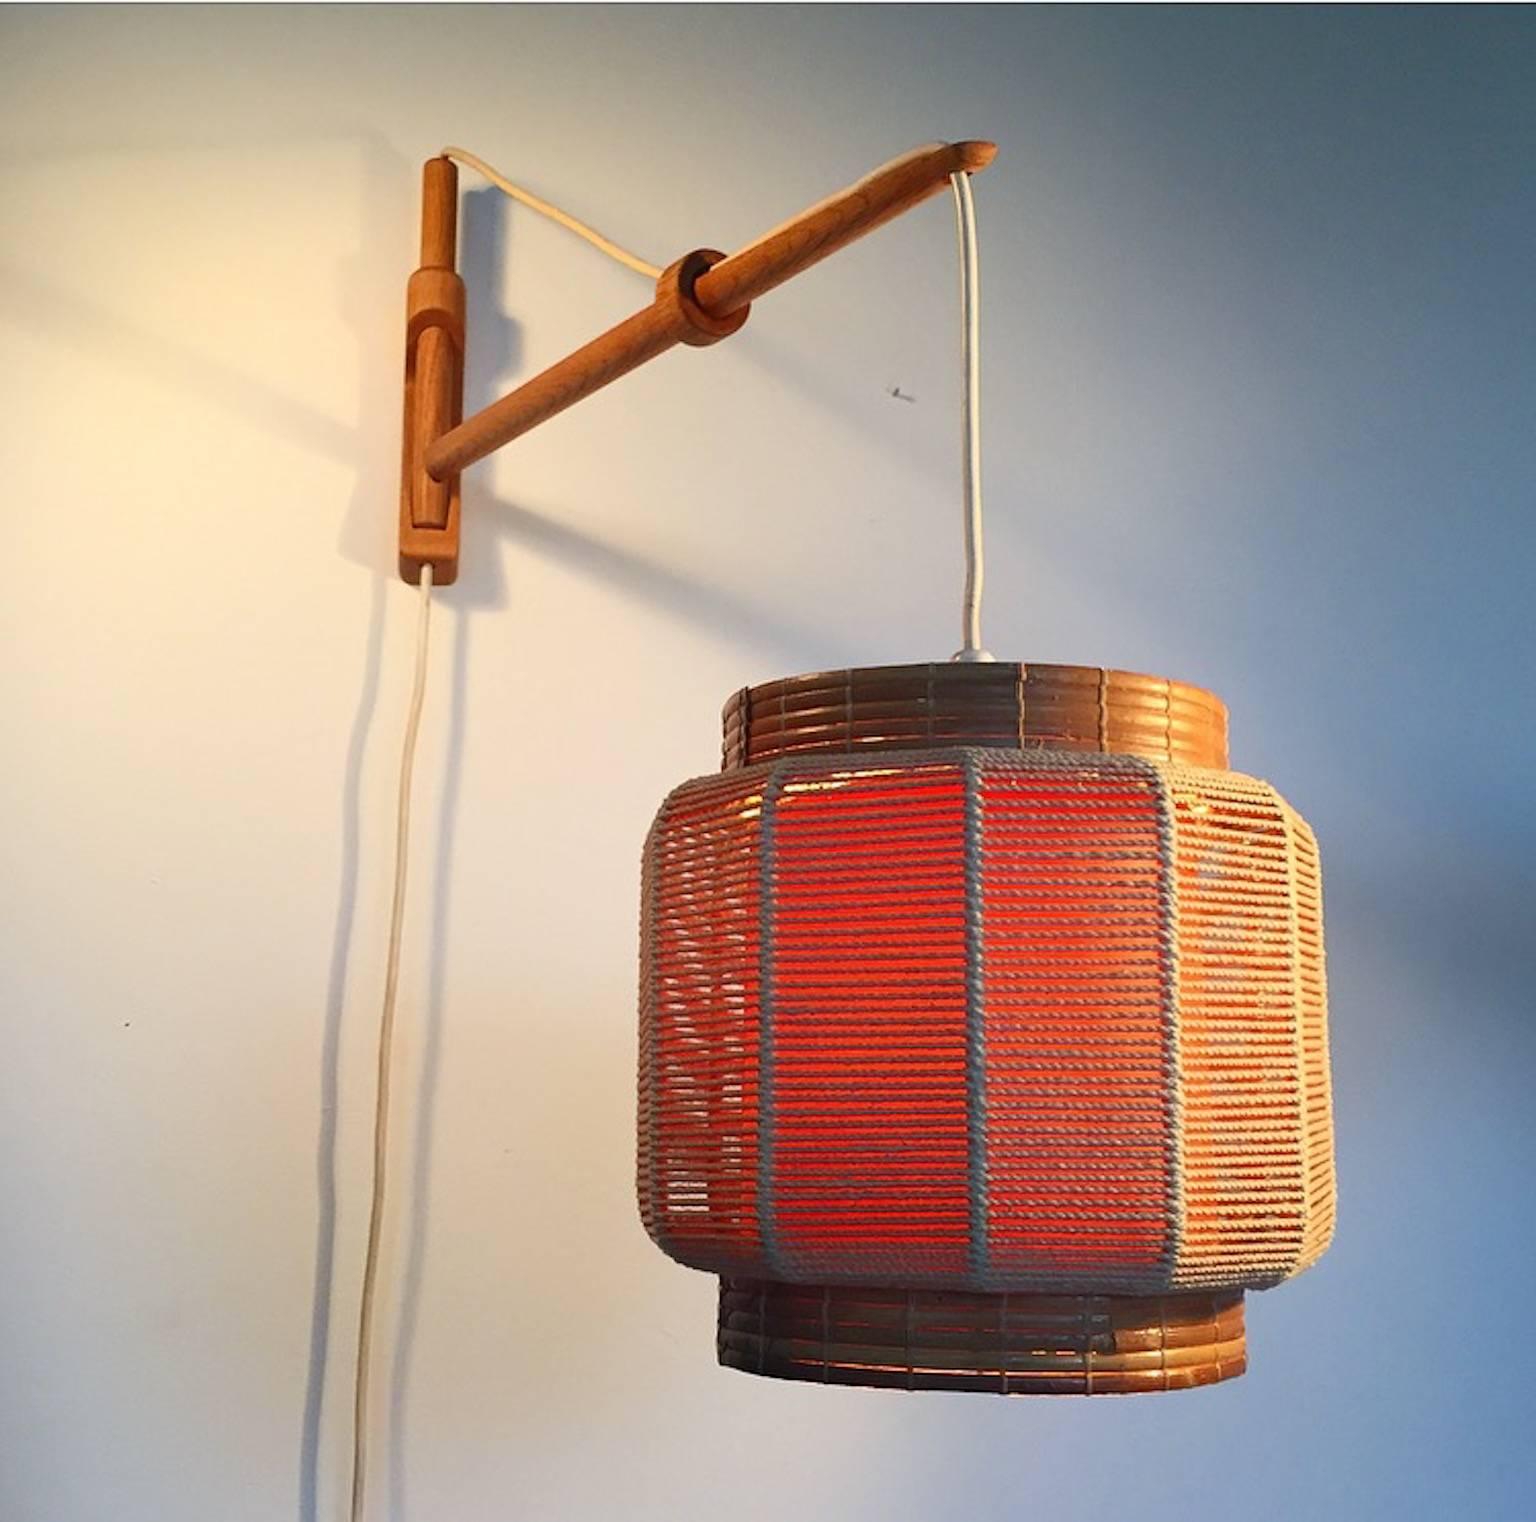 This extremely beautiful crafted wall lamp was designed by the world known Kaare Klint. Kaare Klint was inspired by Japanese lantern and craft, which this lamp beautifully combine.

This lamp that was only made in a limited edition because Kaare